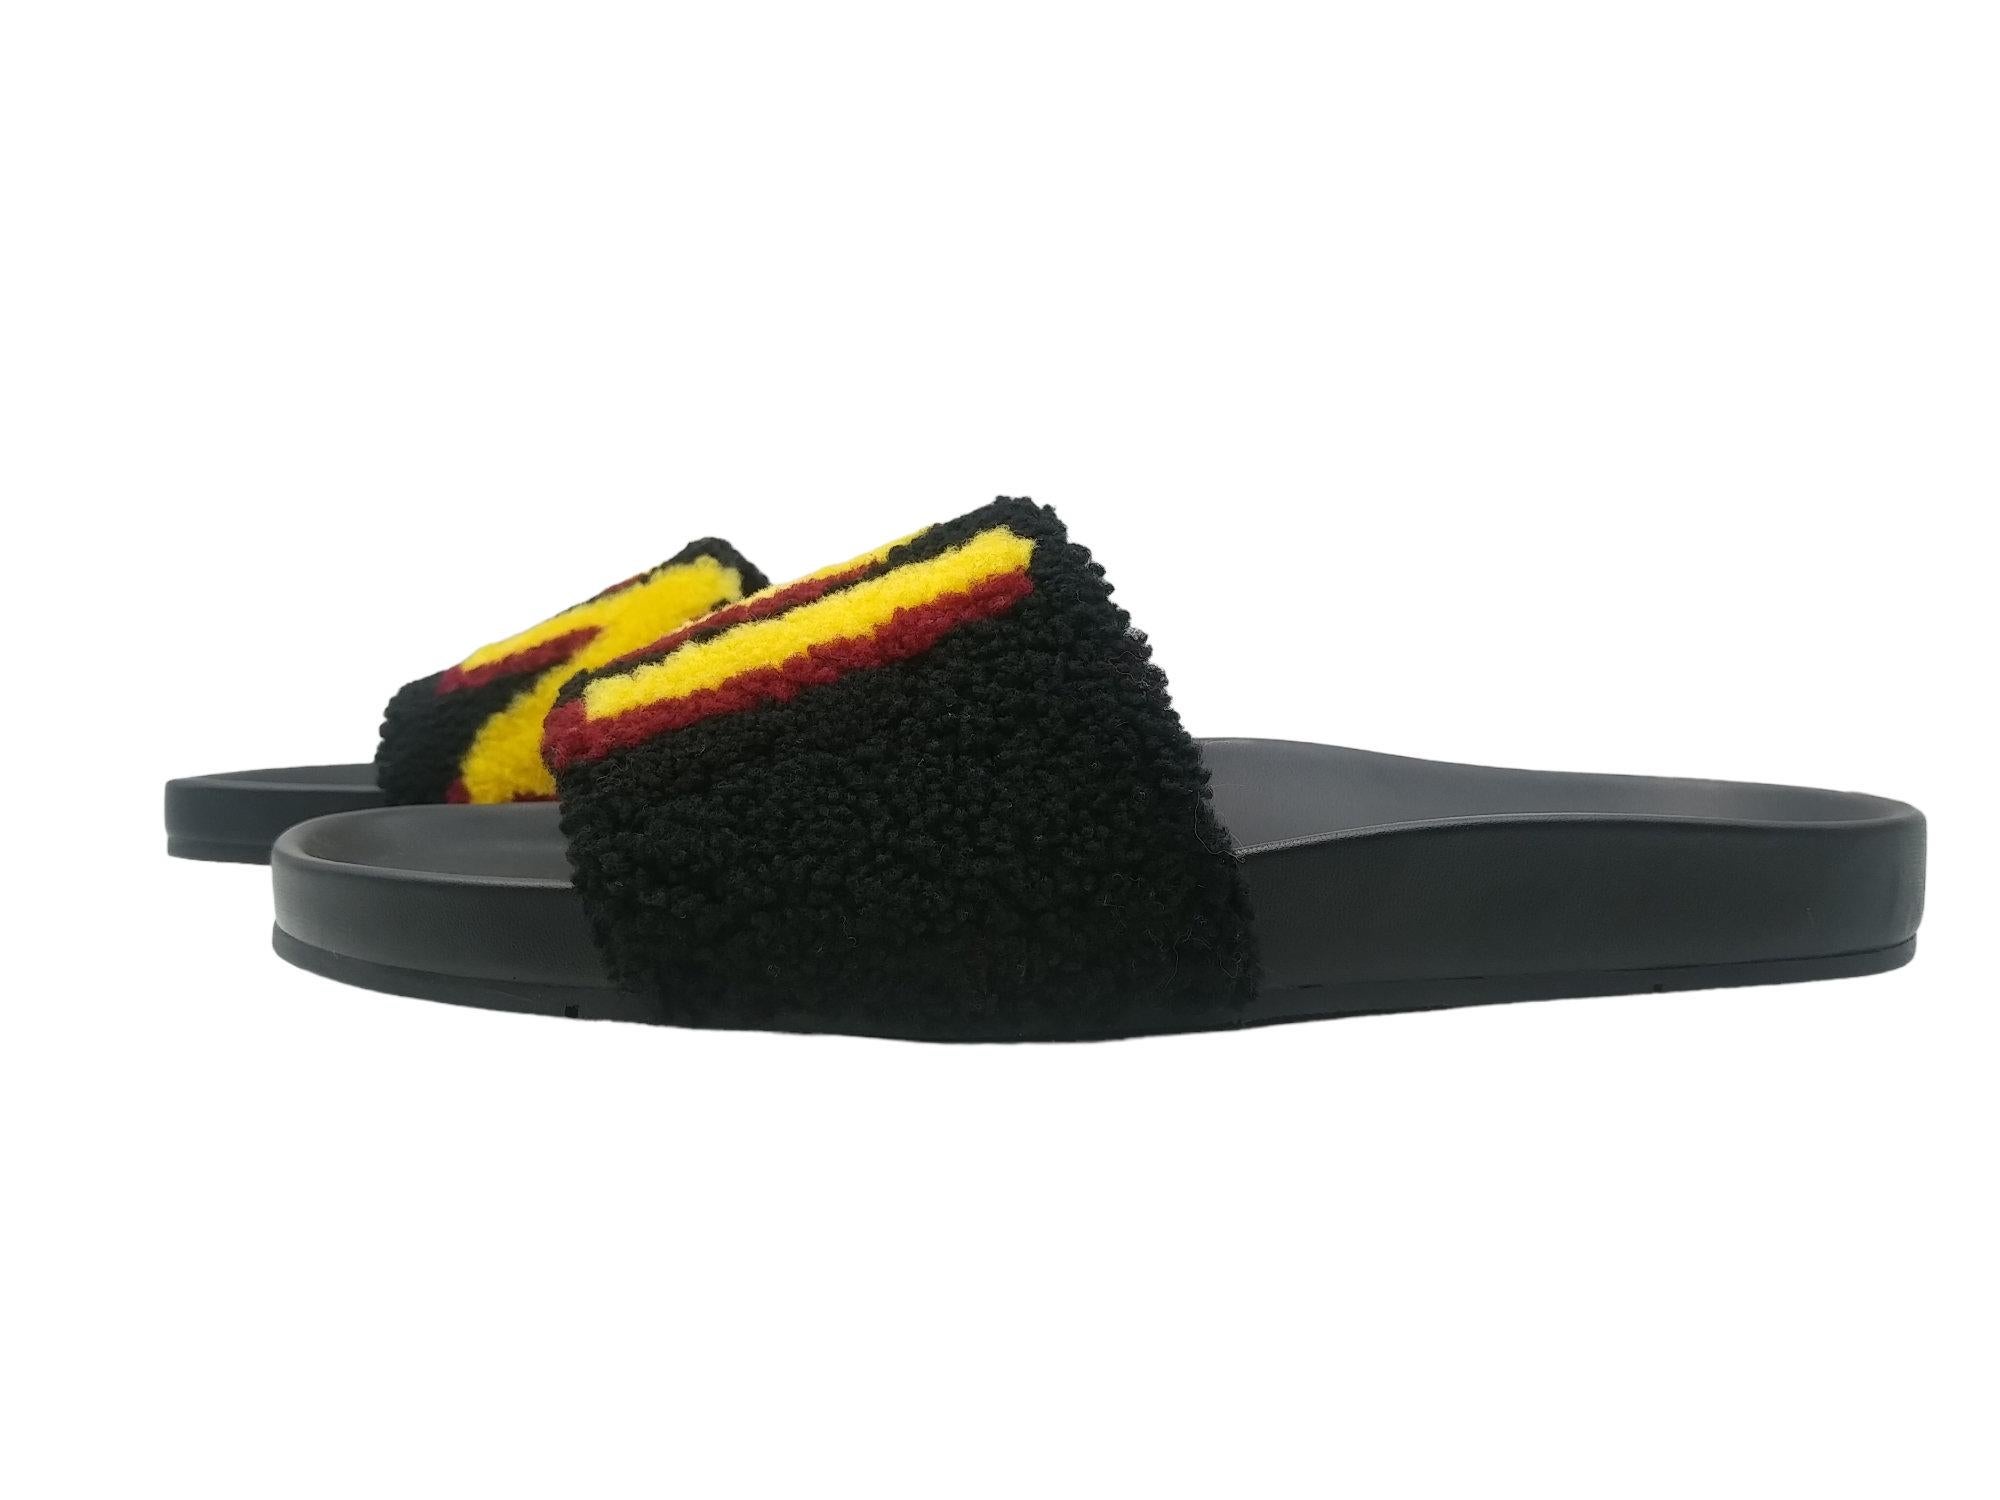 Fendi leather and fur slides slippers, size EU 41 For Sale 2